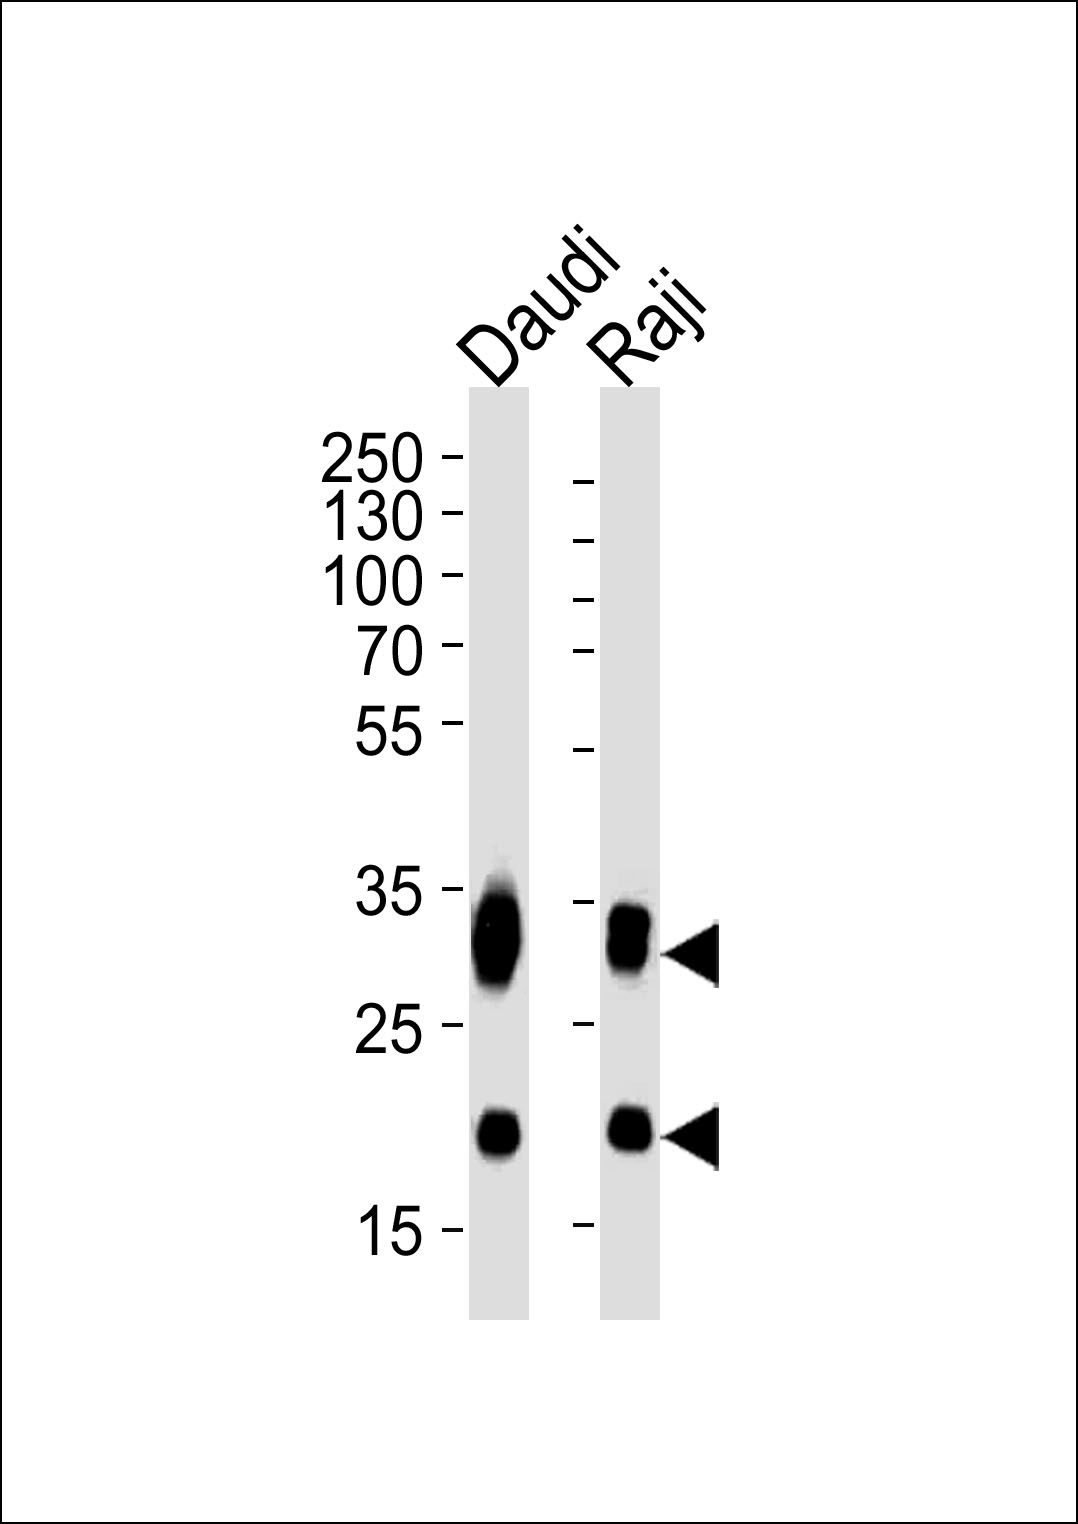 Western blot analysis of lysates from Daudi, Raji cell line (from left to right), using CD74 Antibody(Cat. # AM2257a). AM2257a was diluted at 1:1000 at each lane. A goat anti-mouse IgG H&L(HRP) at 1:5000 dilution was used as the secondary antibody. Lysates at 35?g per lane.